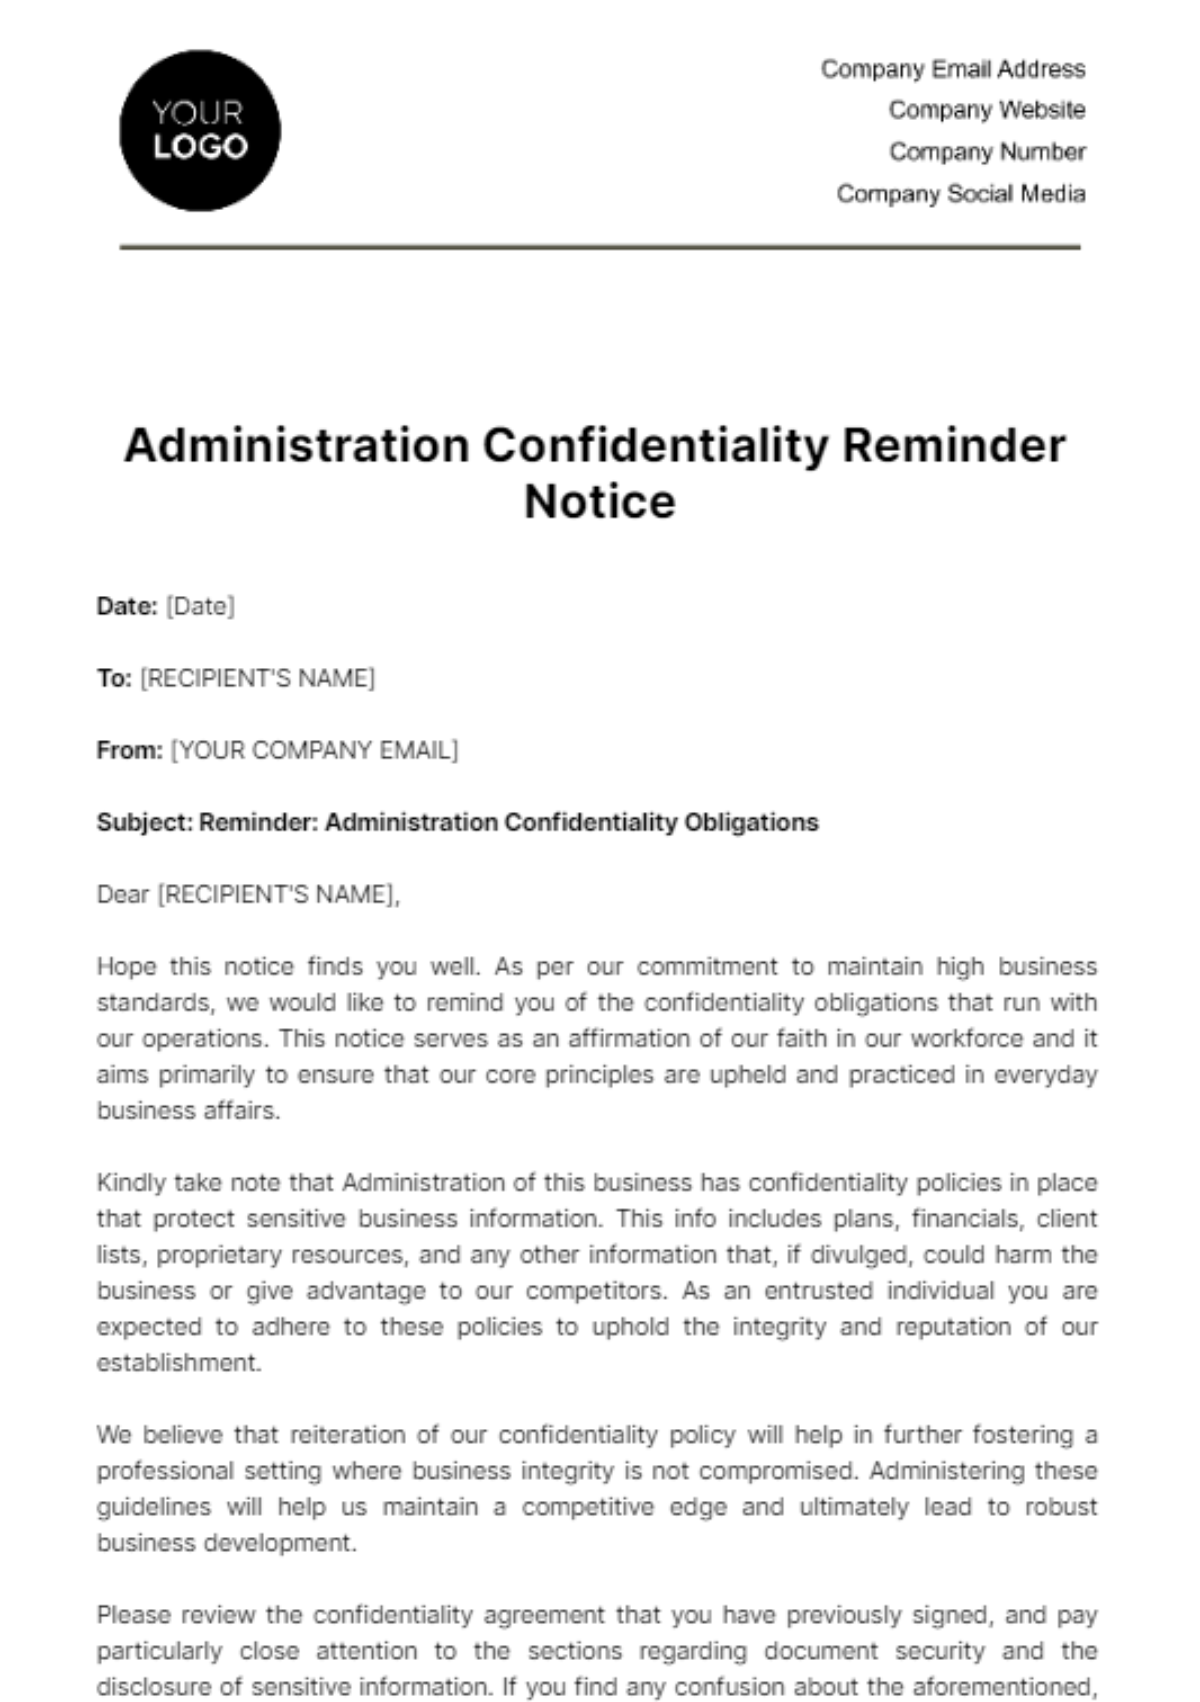 Free Administration Confidentiality Reminder Notice Template